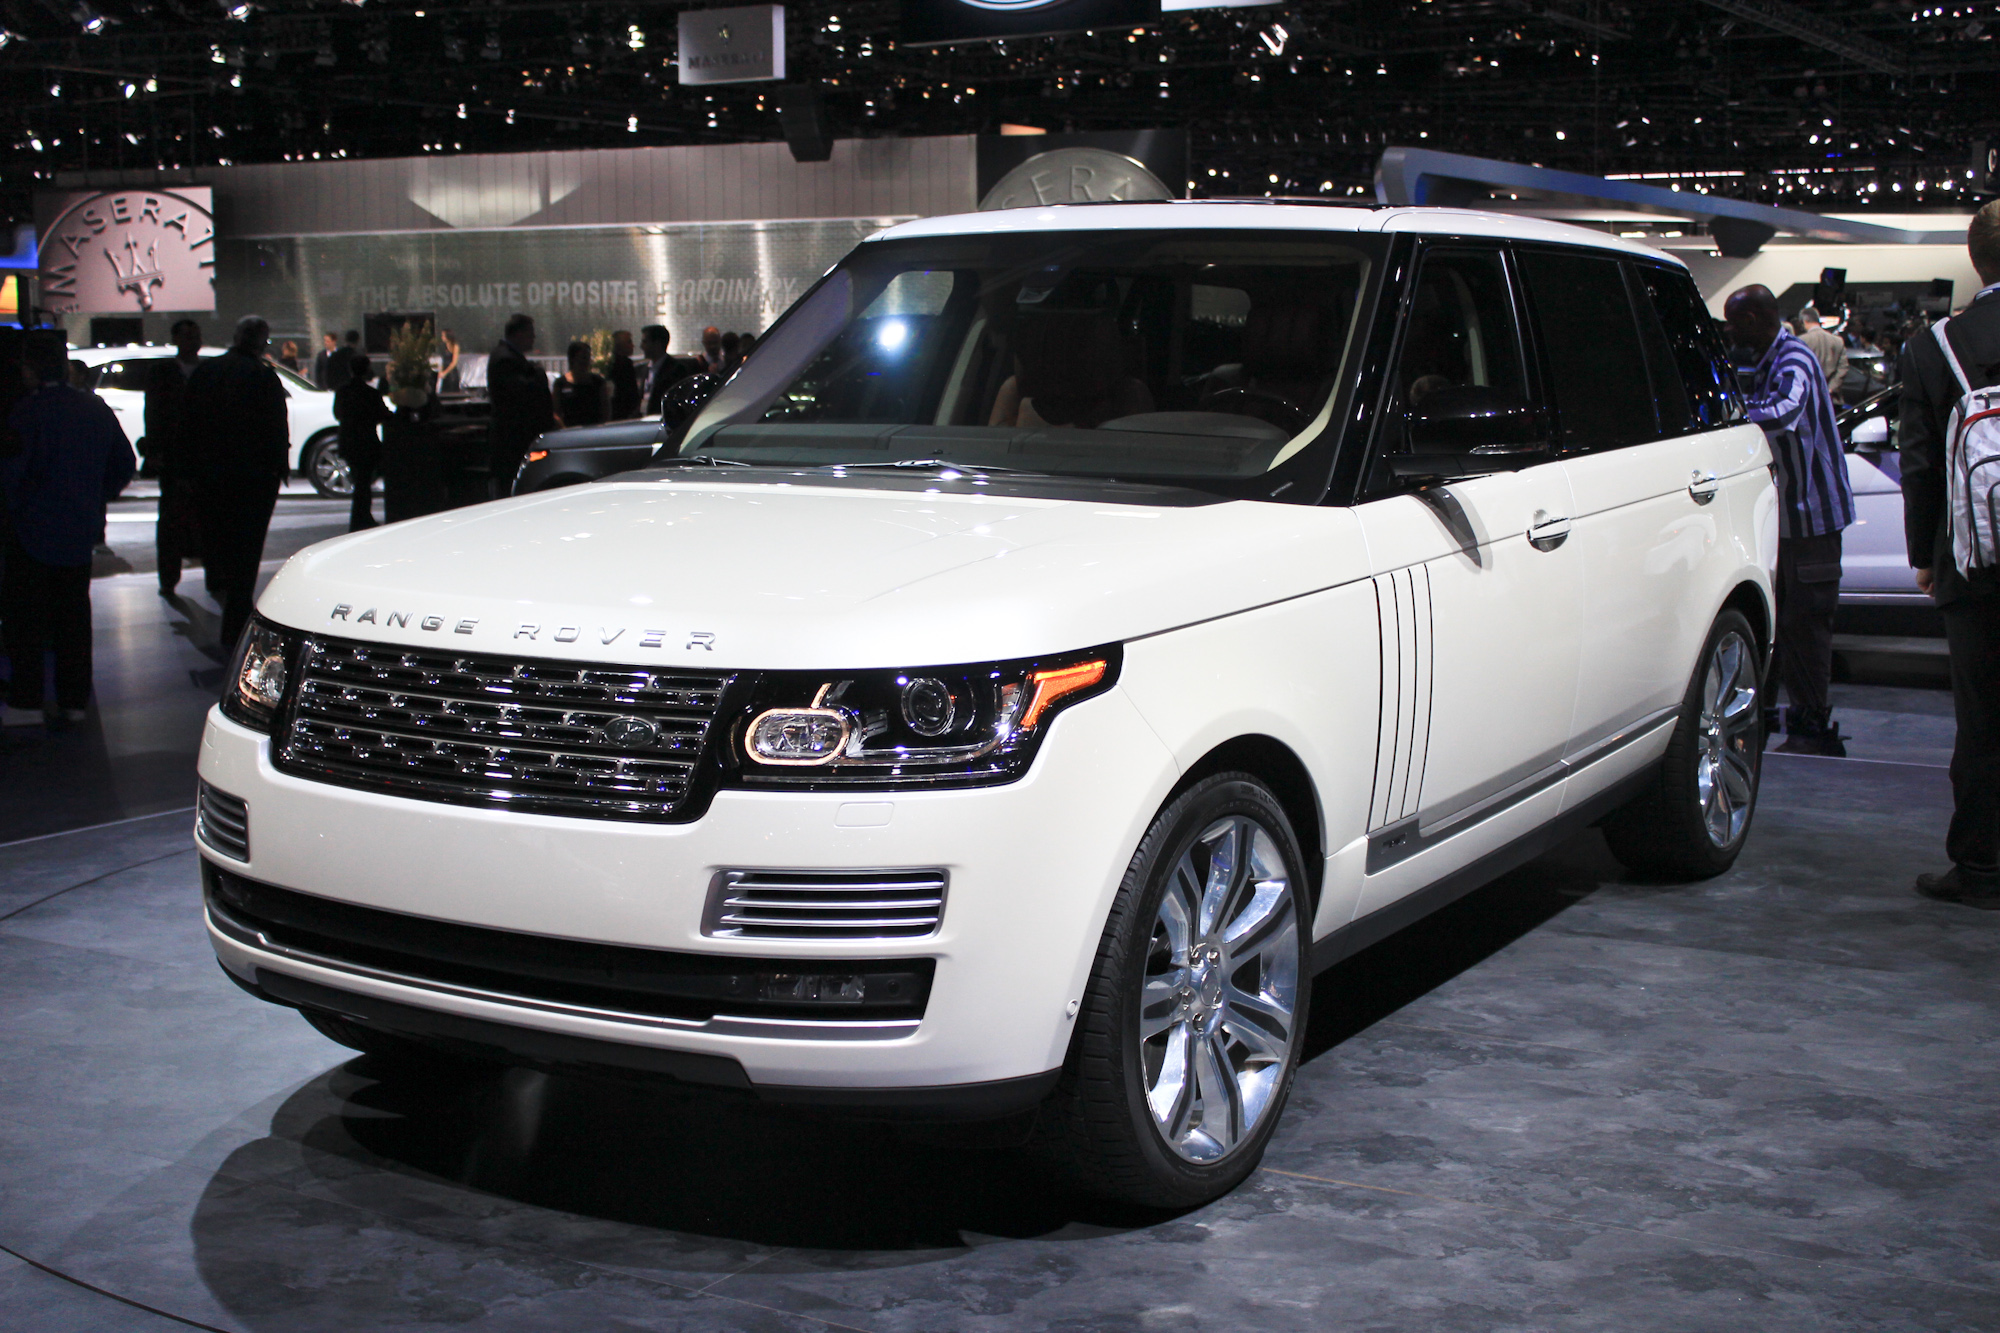 Range Rover Autobiography Long Wheelbase  . Changes Include Front Grille And Side Vents And Badging In Black Enamel And Chrome.